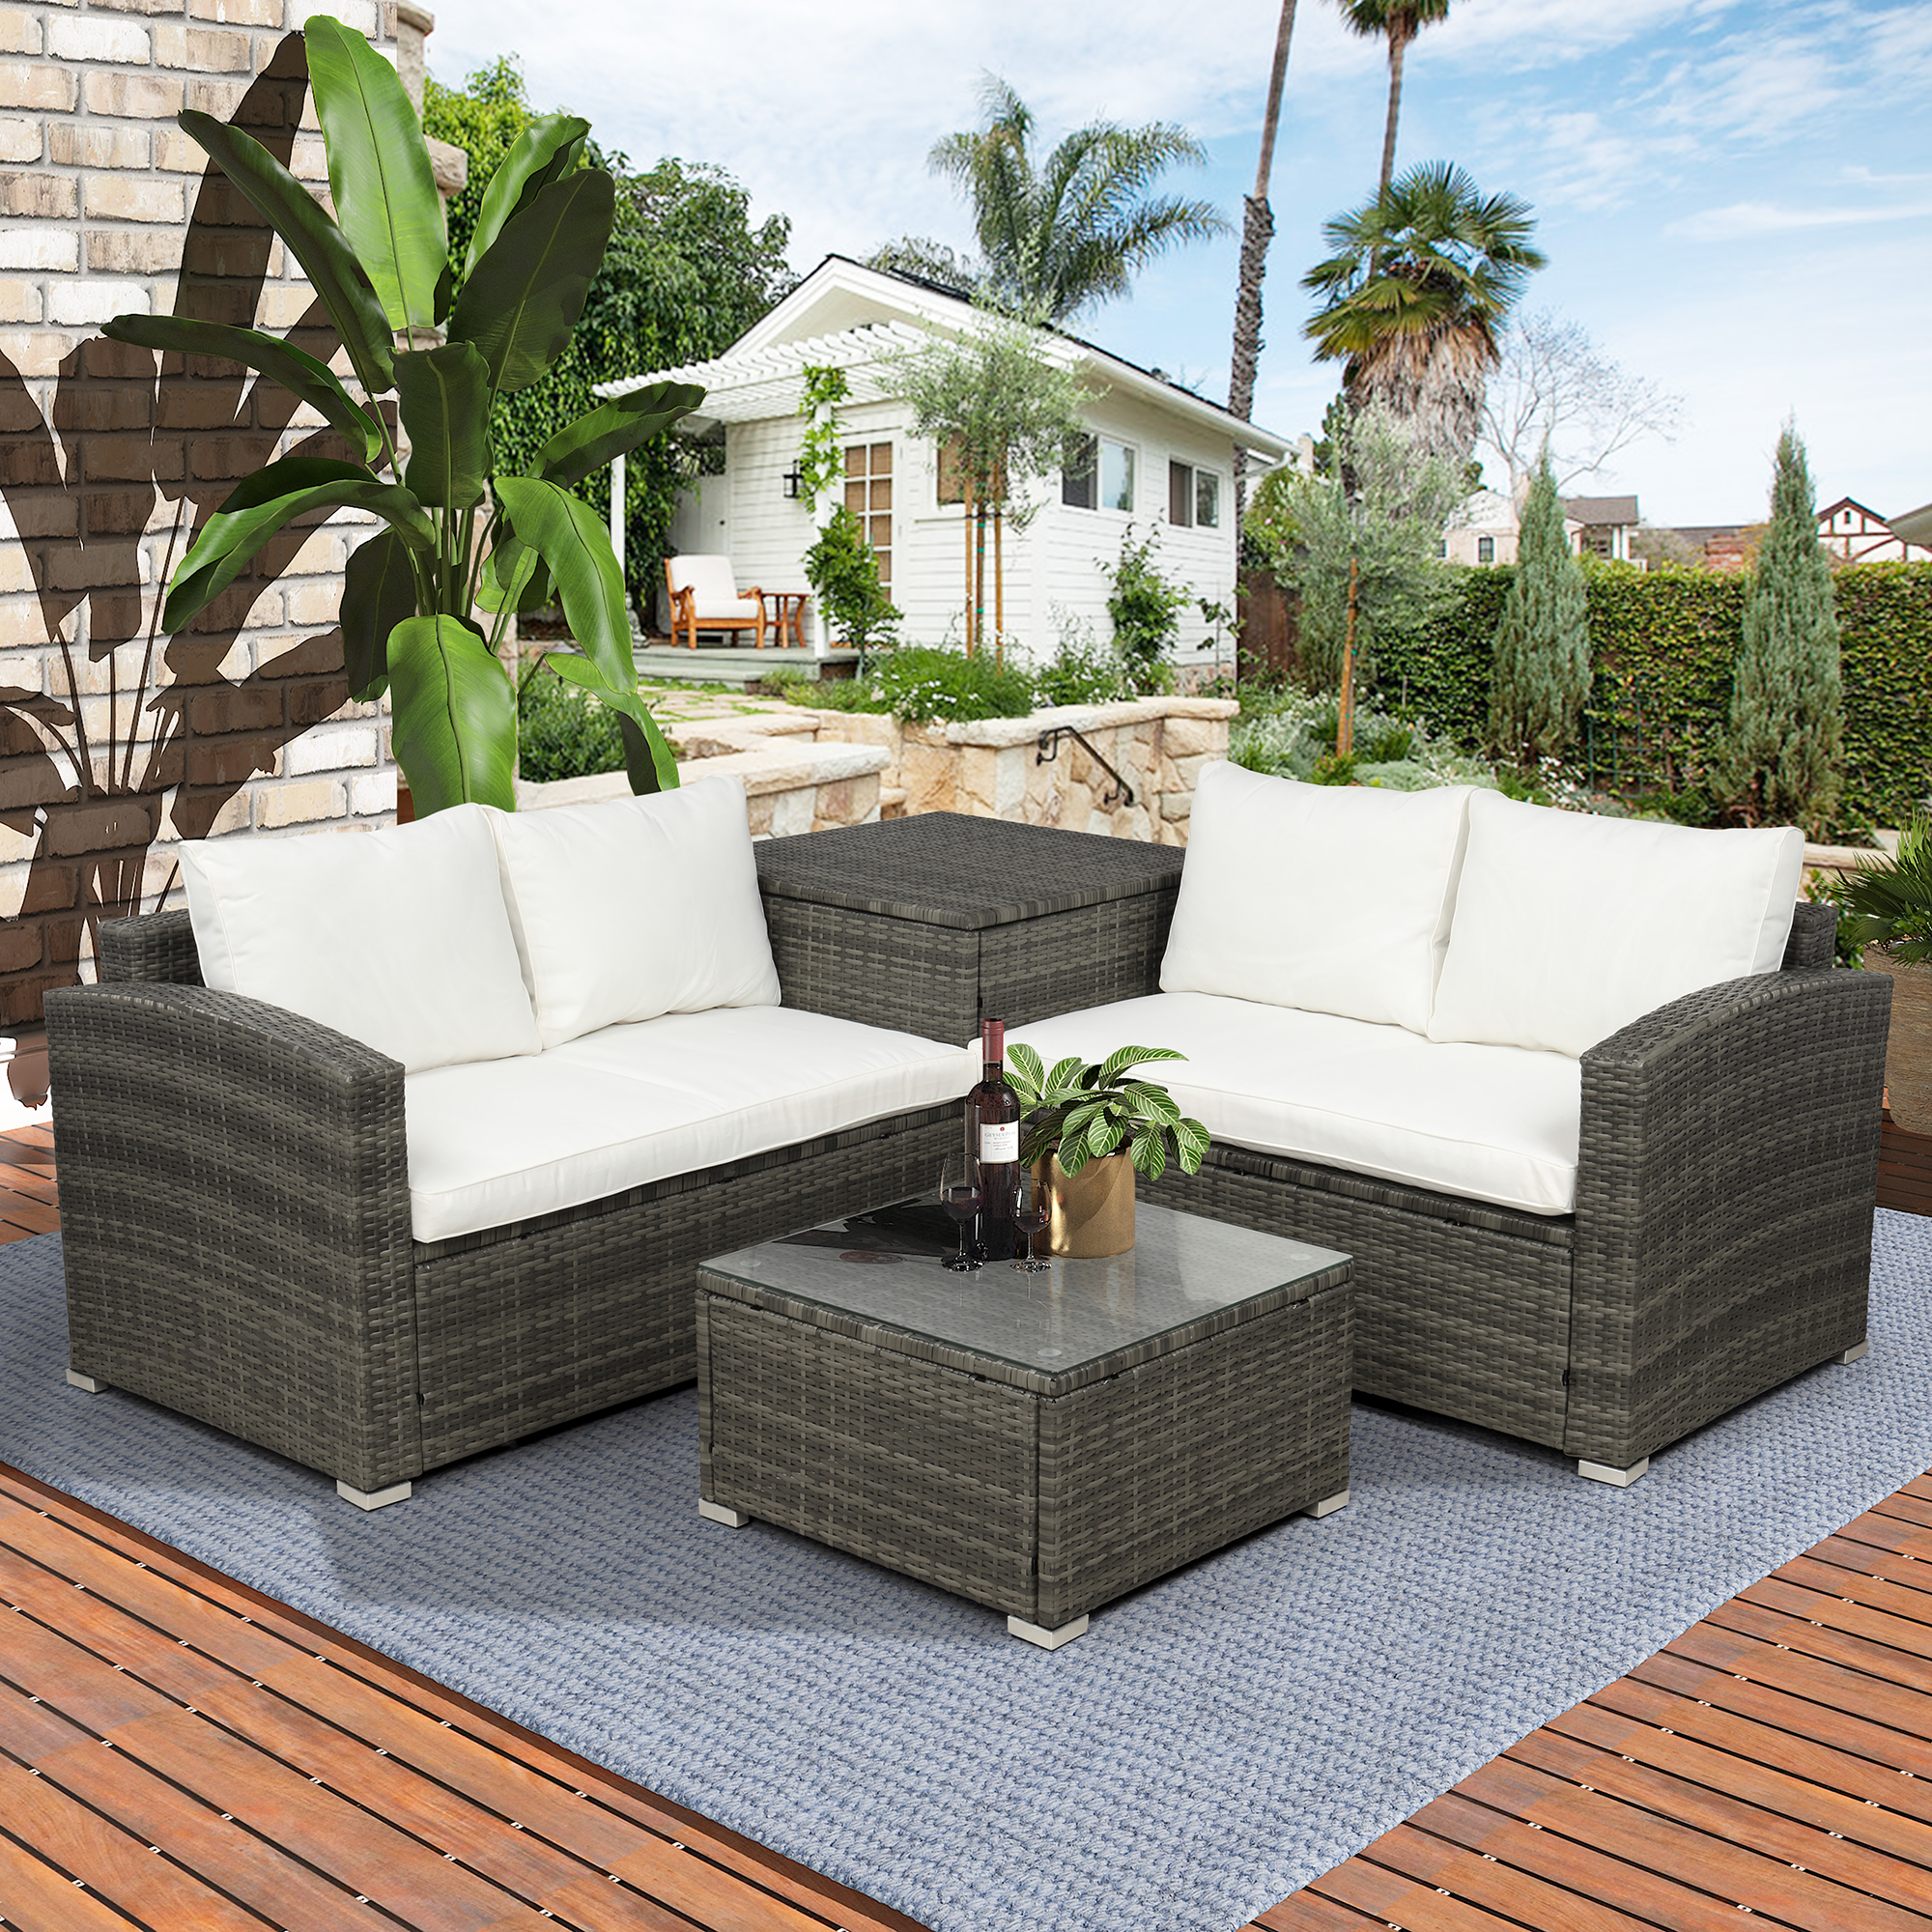 Outdoor Patio Furniture Set, 4-Piece Gray Wicker Patio Furniture Sets, Rattan Wicker Conversation Set w/L-Seats Sofa, R-Seats Sofa, Cushion box, Glass Dining Table, Padded Cushions, Beige, S13126 - image 2 of 7